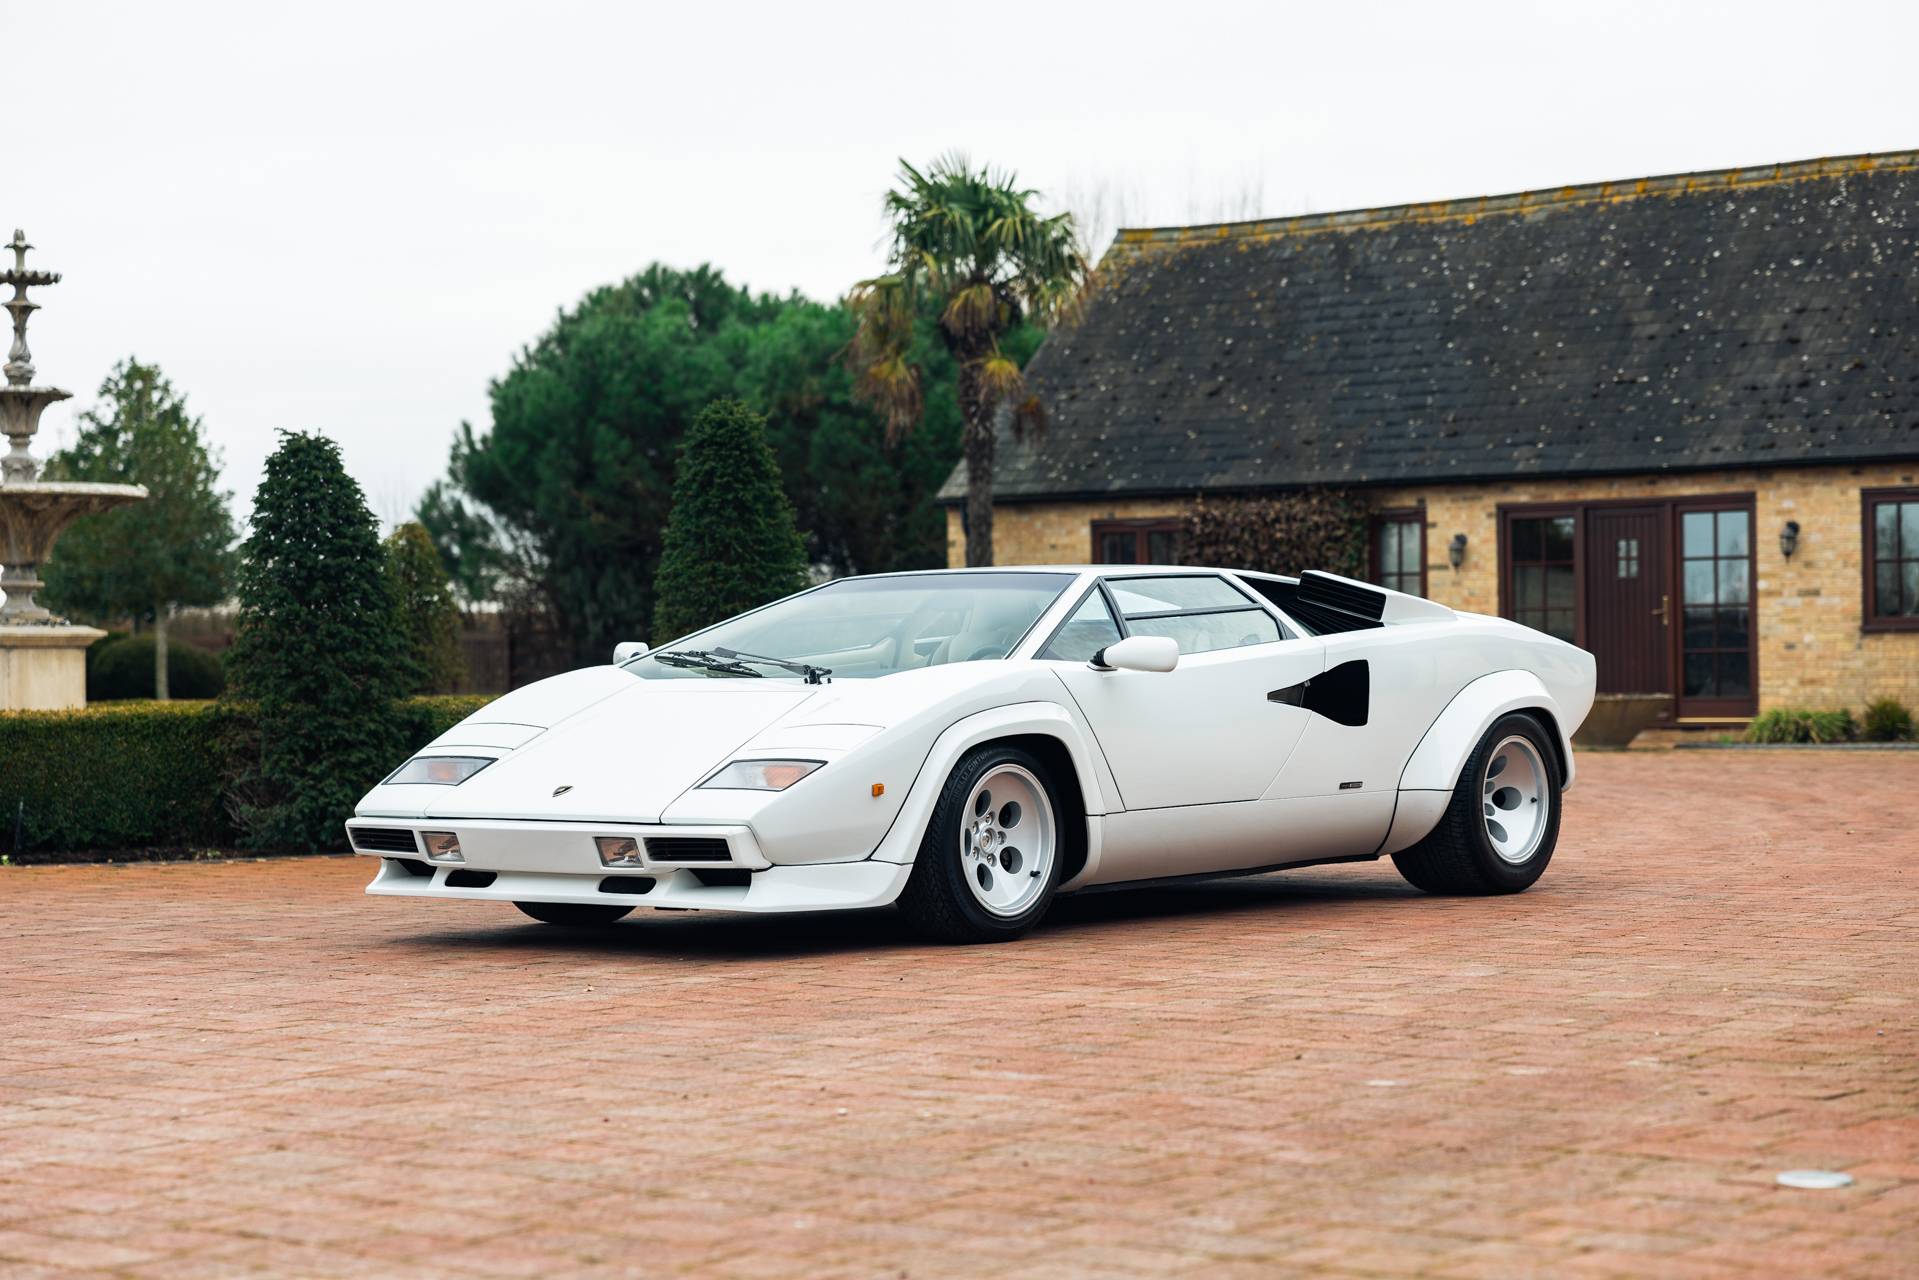 claasic lamborghini countach Mask for Sale by LewisJWards